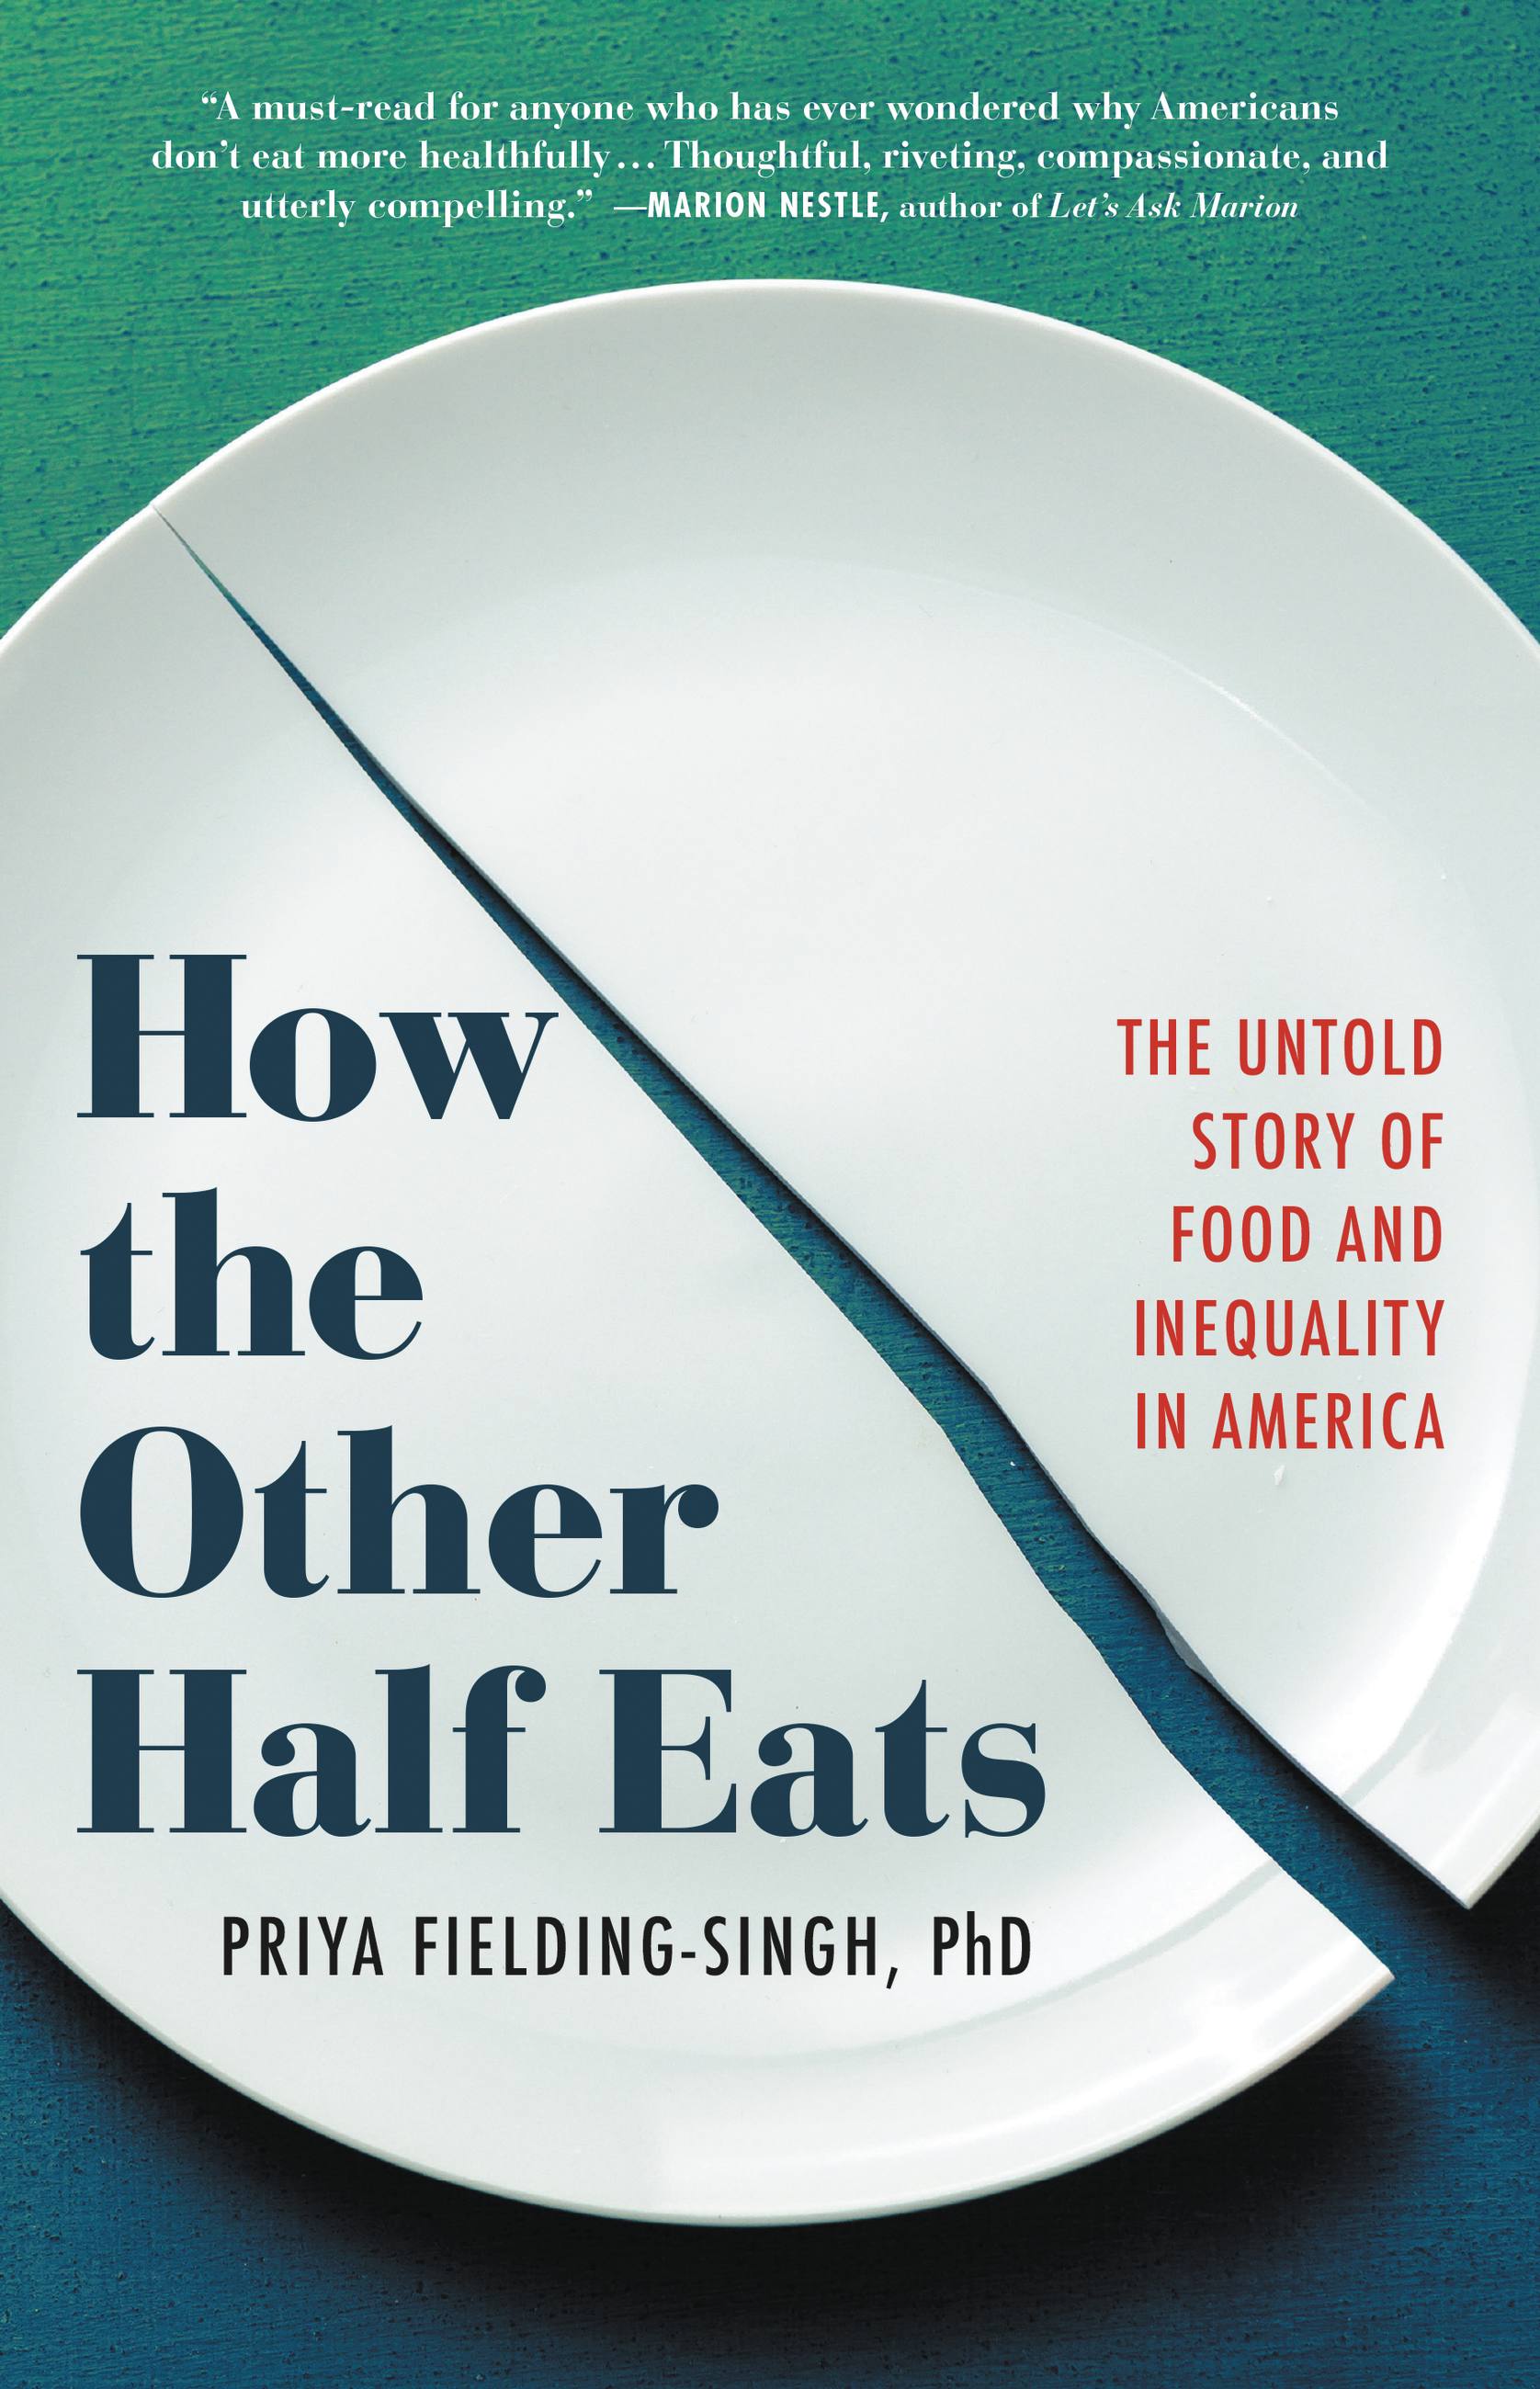 How the Other Half Eats by Priya Fielding-Singh, PhD Hachette Book Group picture